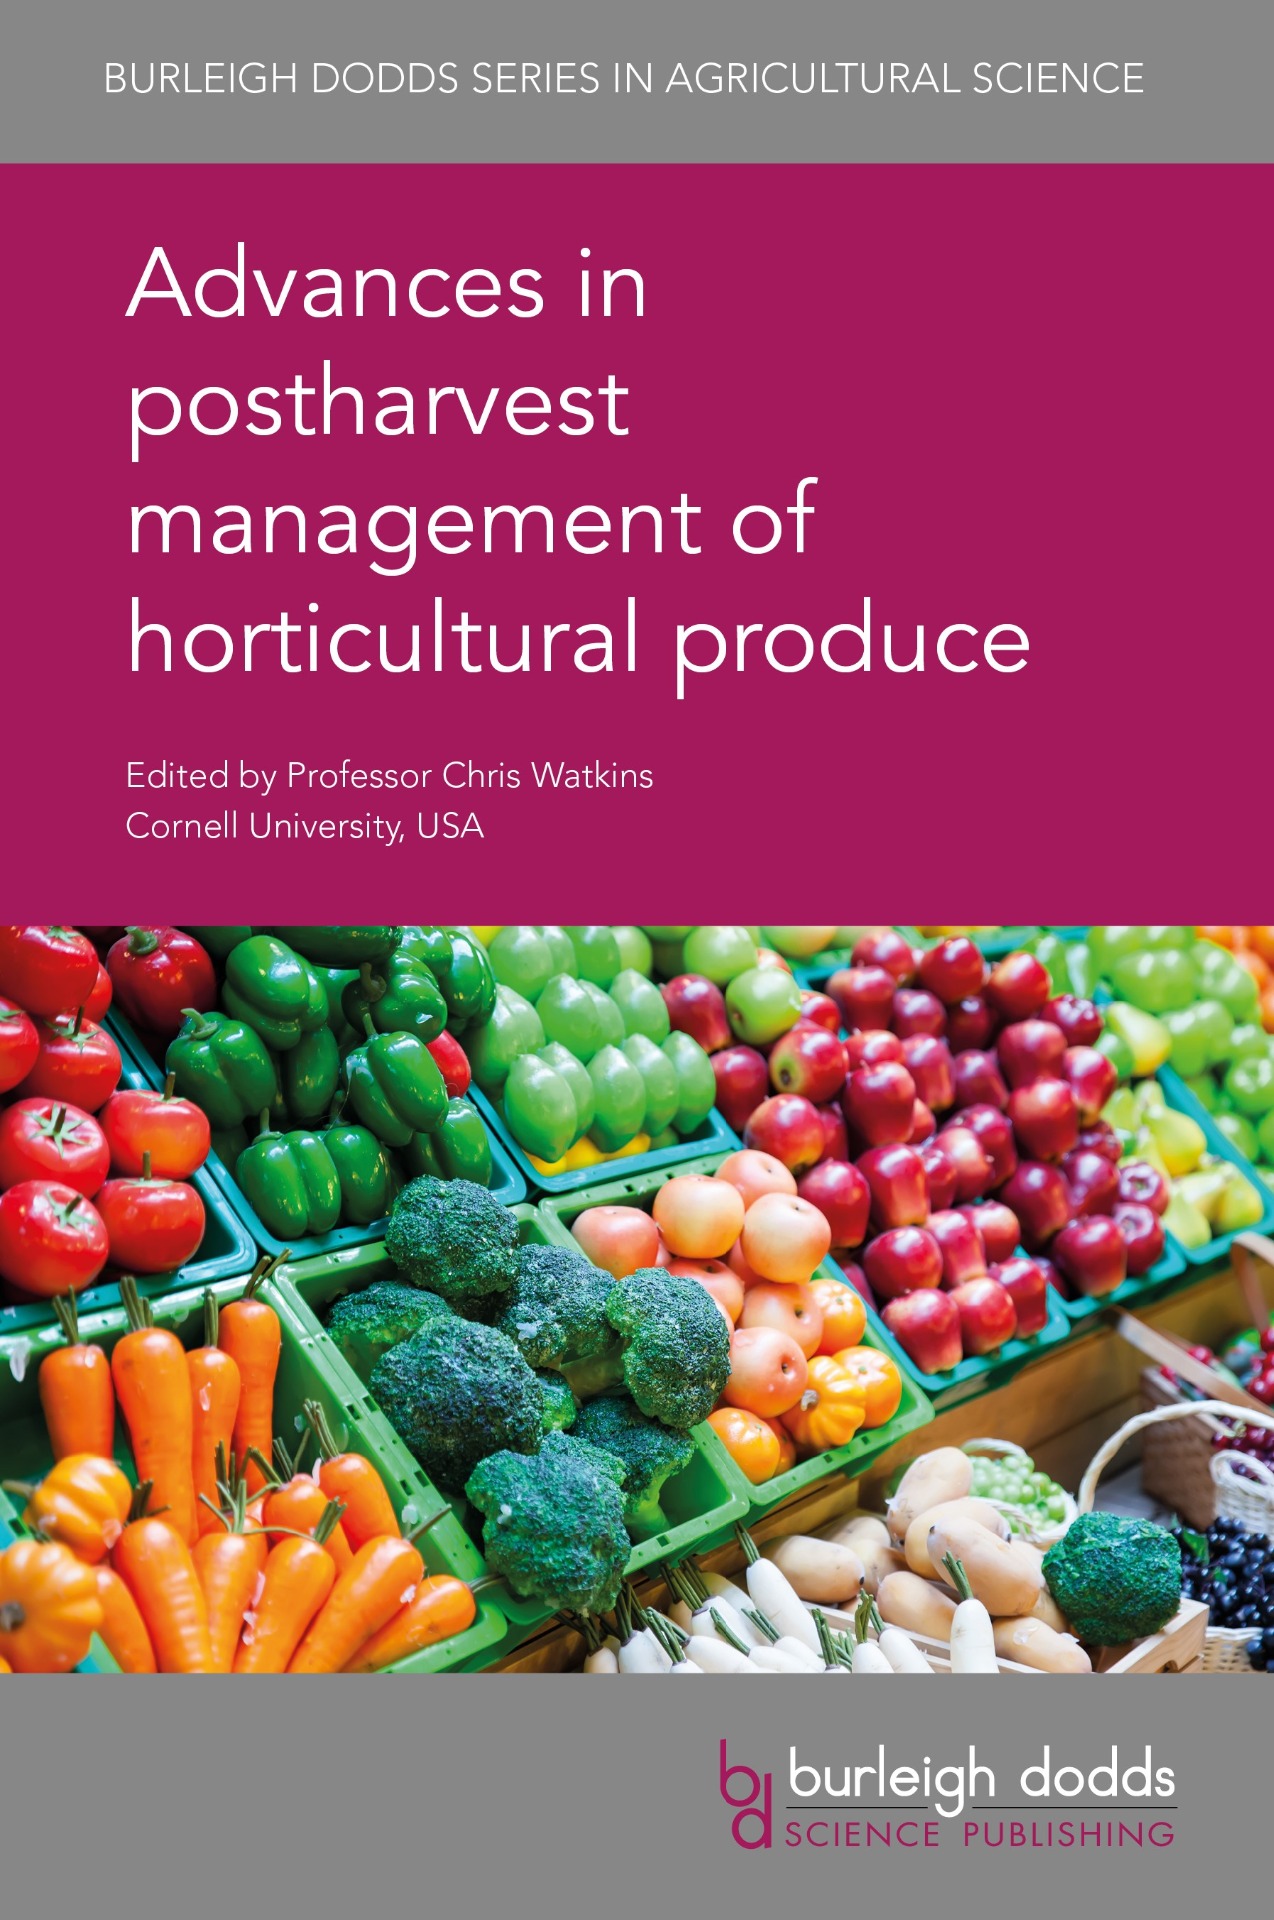 Advances in postharvest management of horticultural produce